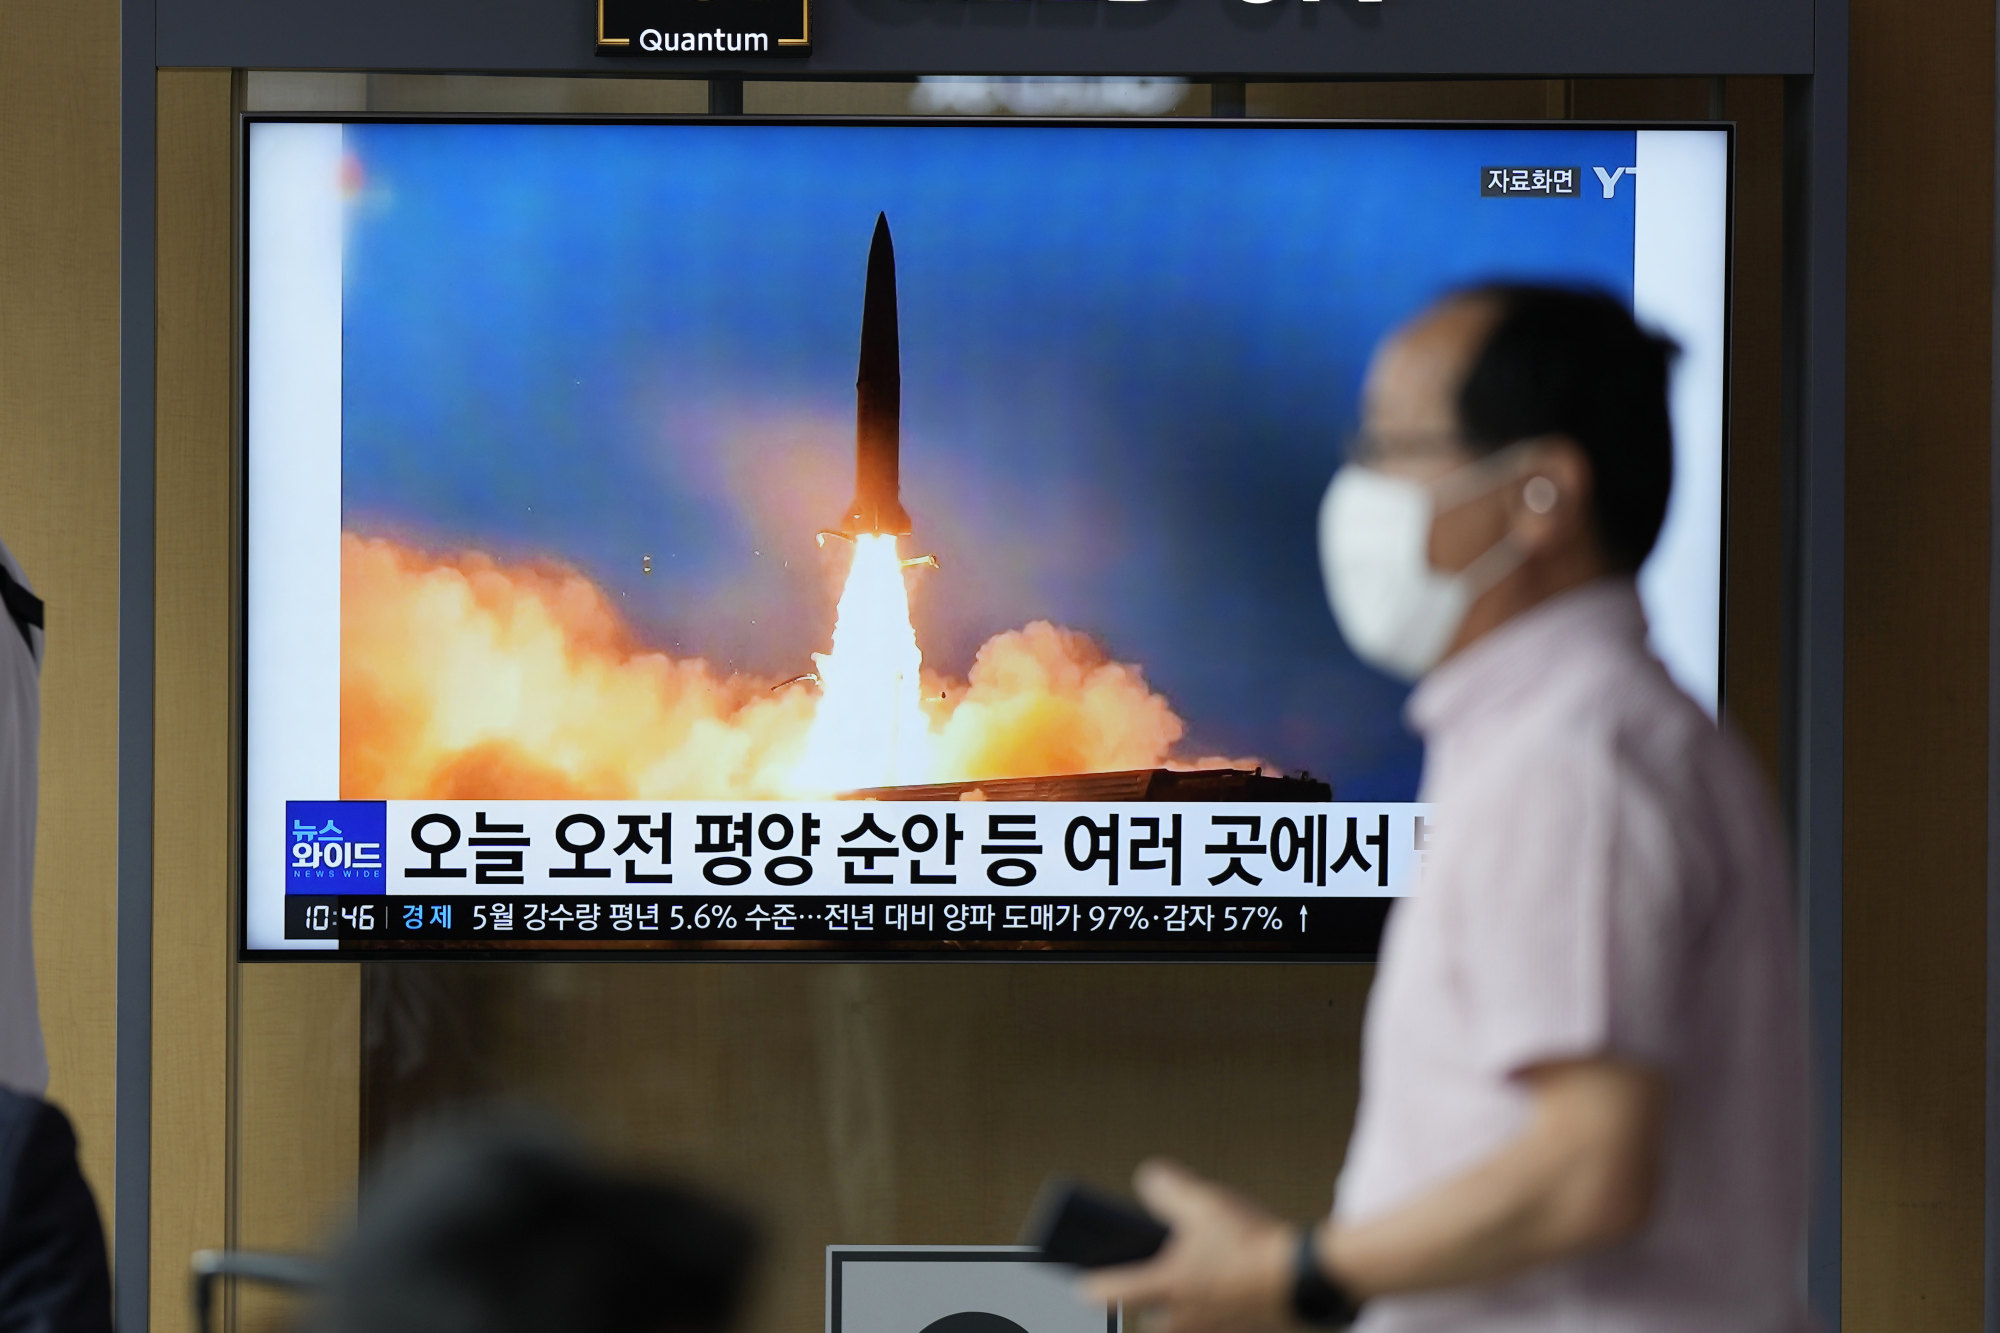 A North Korean missile launch as seen on a TV screen at a railway station in Seoul, South Korea, on June 5. Photo: AP